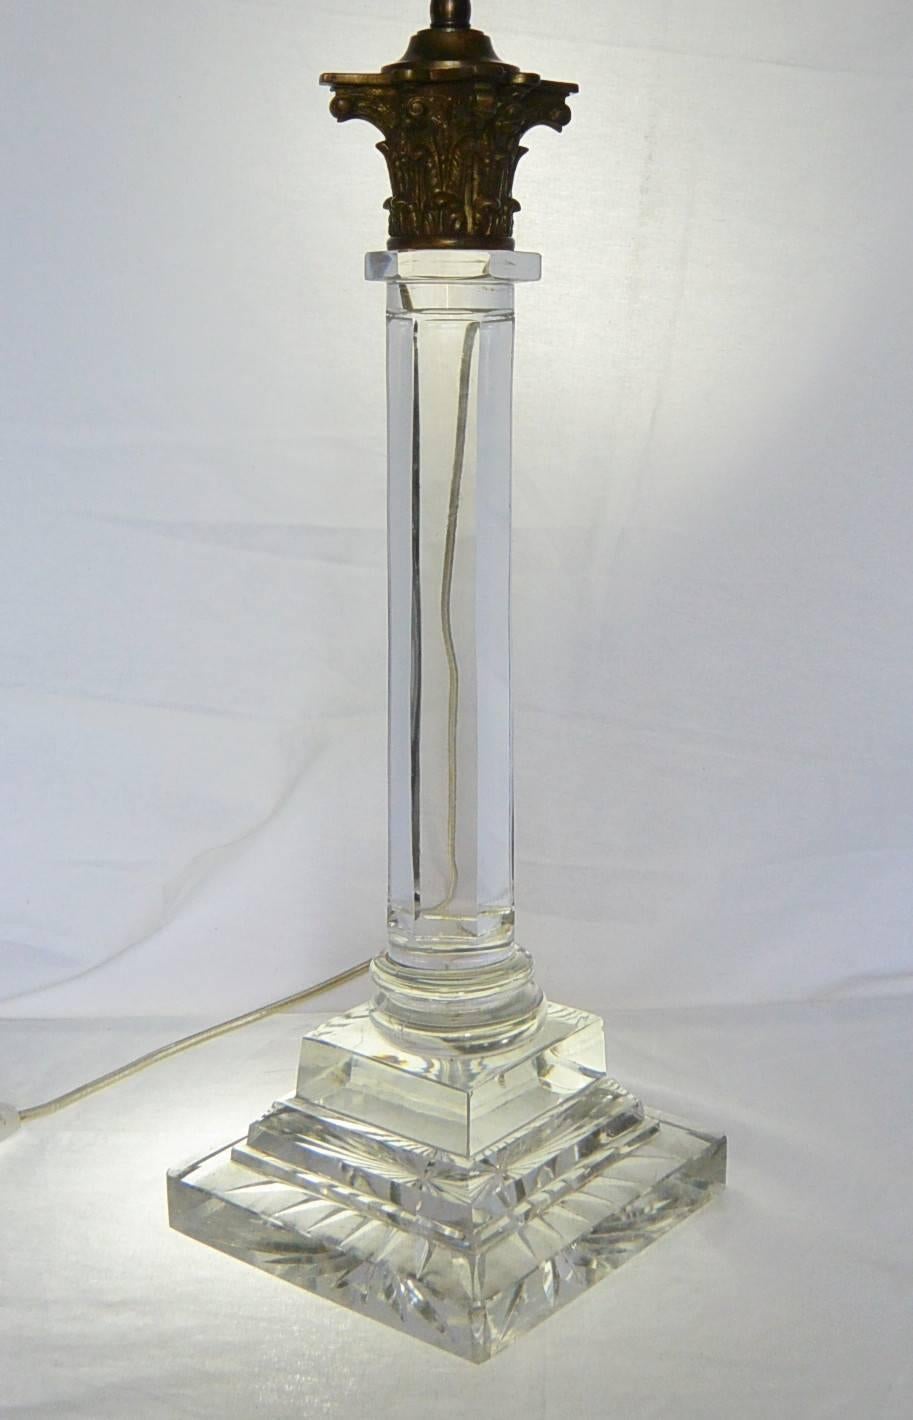 English crystal column lamp.  Antique crystal Corinthian column lamp with fine heavy brass capital above faceted column on stepped pedestal base. Newly electrified with silk cord and switch. England, mid-19th century.
Dimension: 6.25